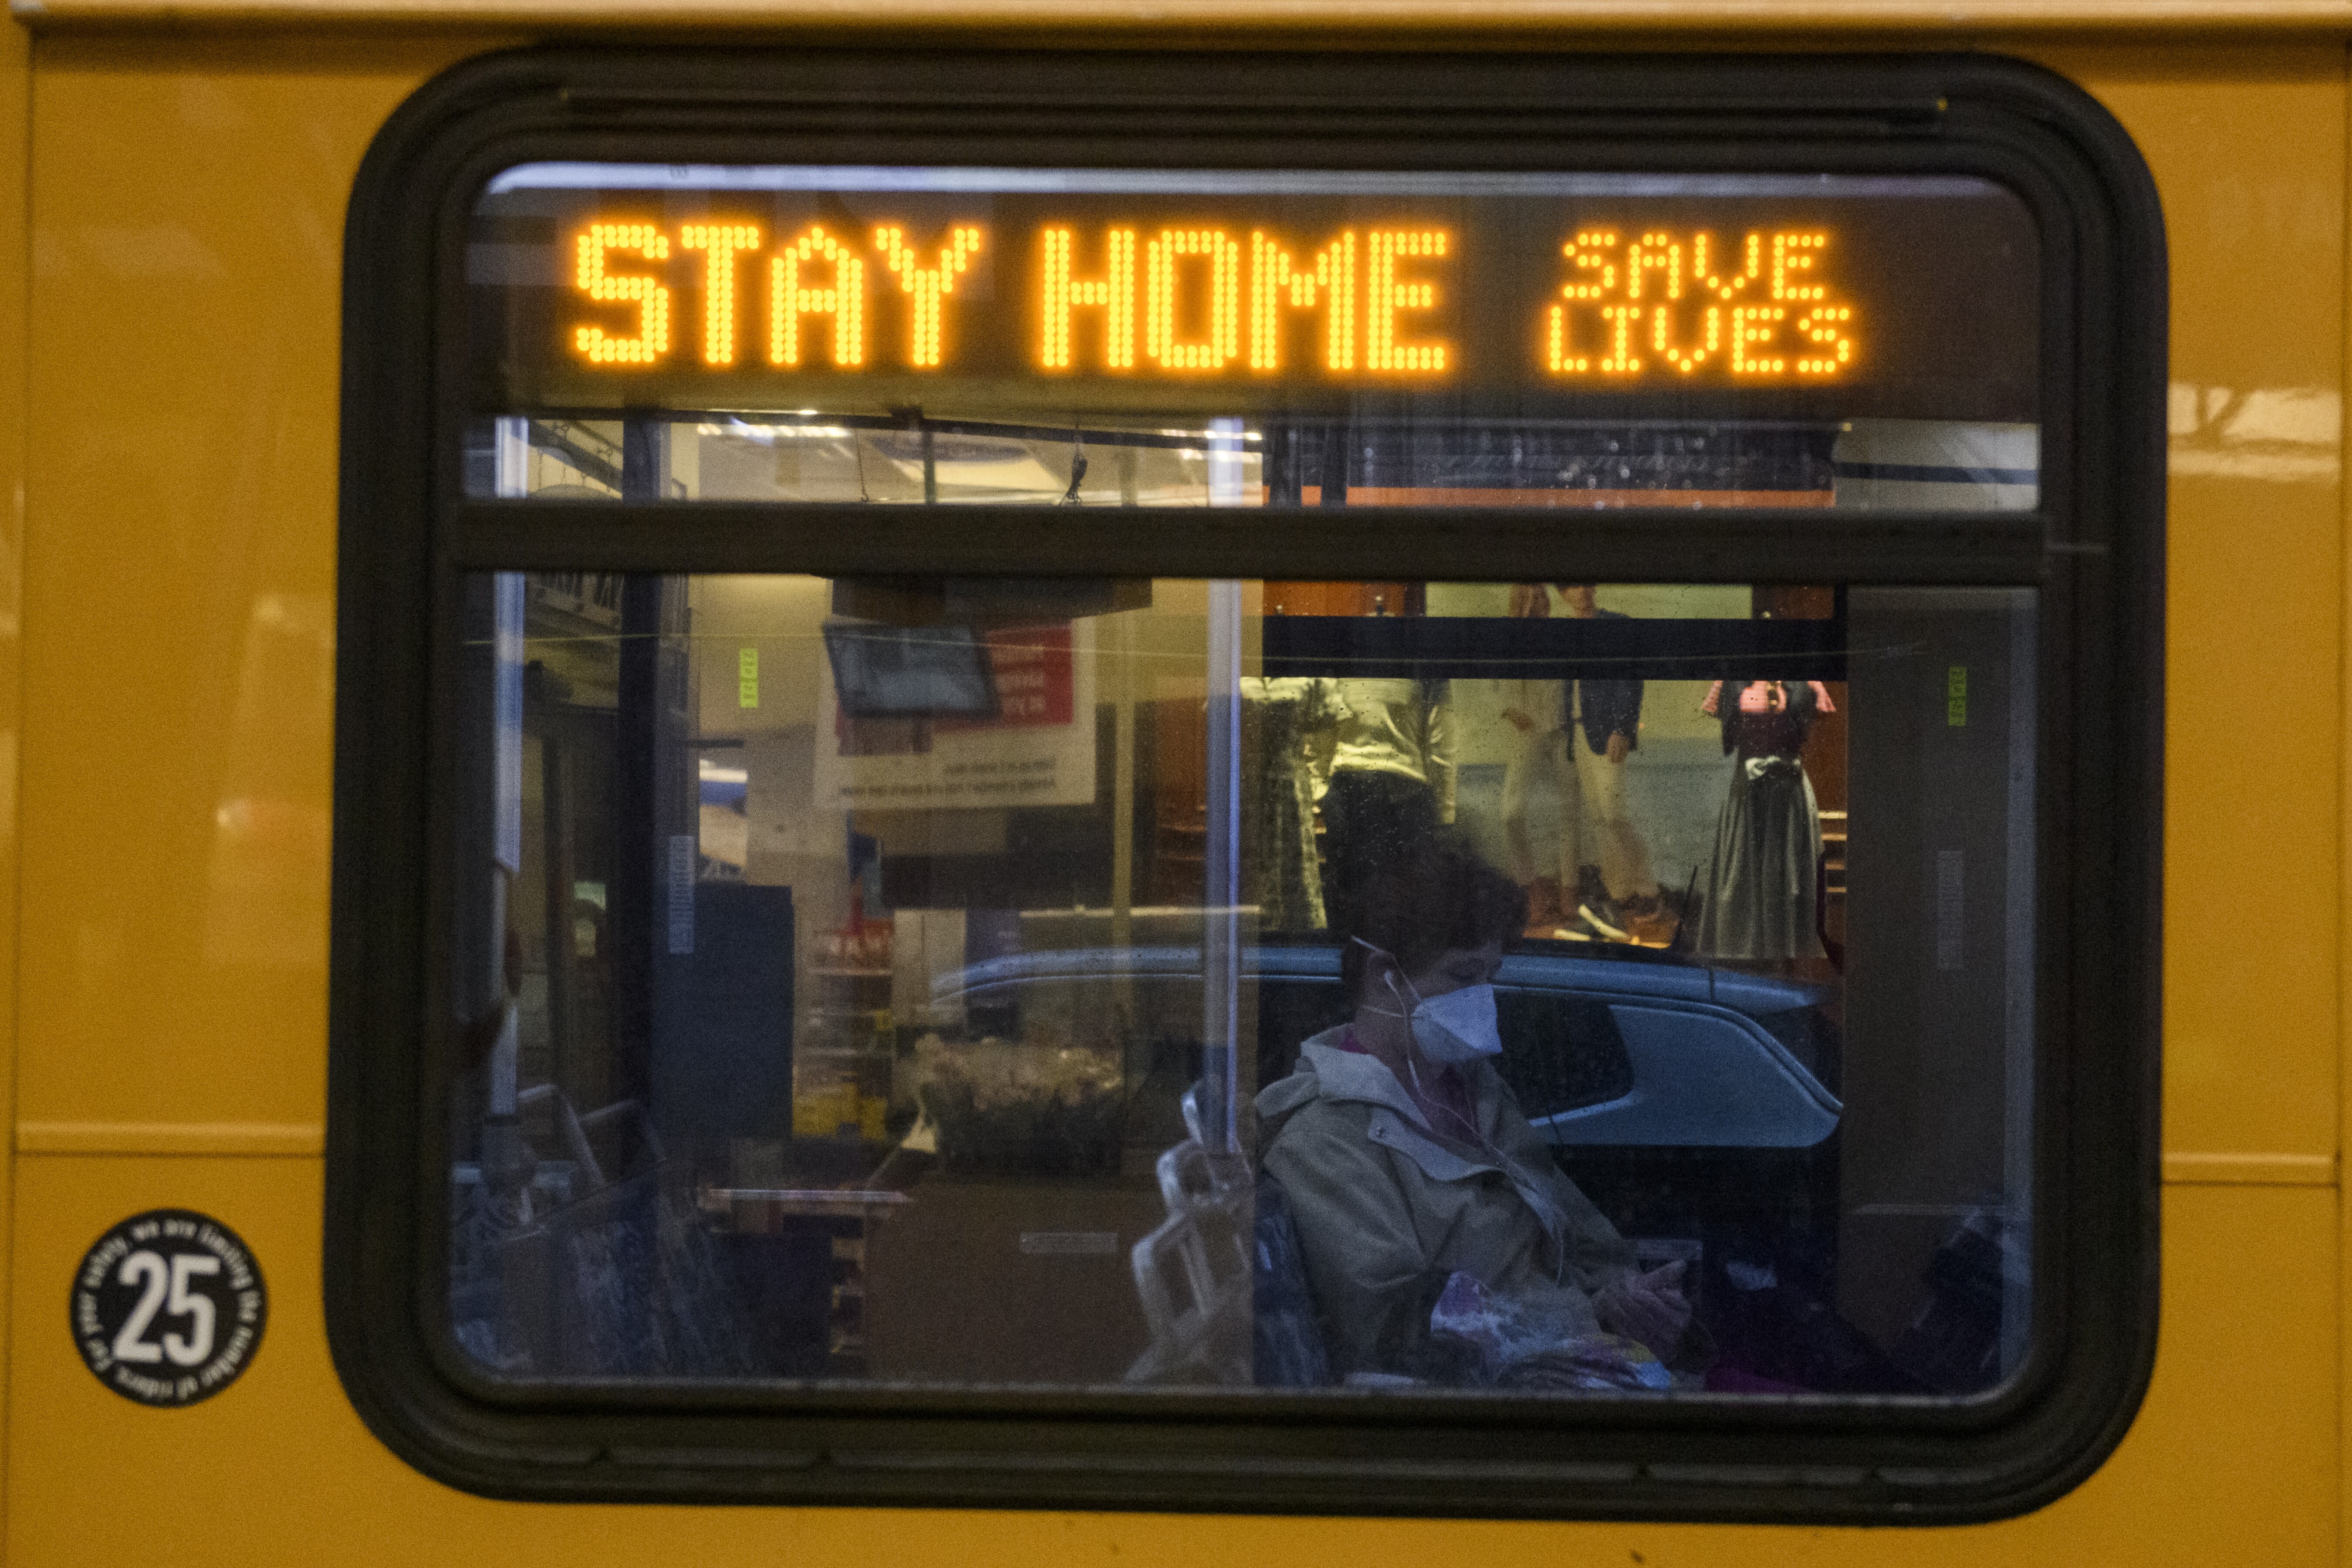 A commuter wearing a protective mask sits on a bus displaying an electronic sign that reads “Stay Home. Save Lives” in downtown Pittsburgh, Pennsylvania, US, on April 21. Photo: Bloomberg